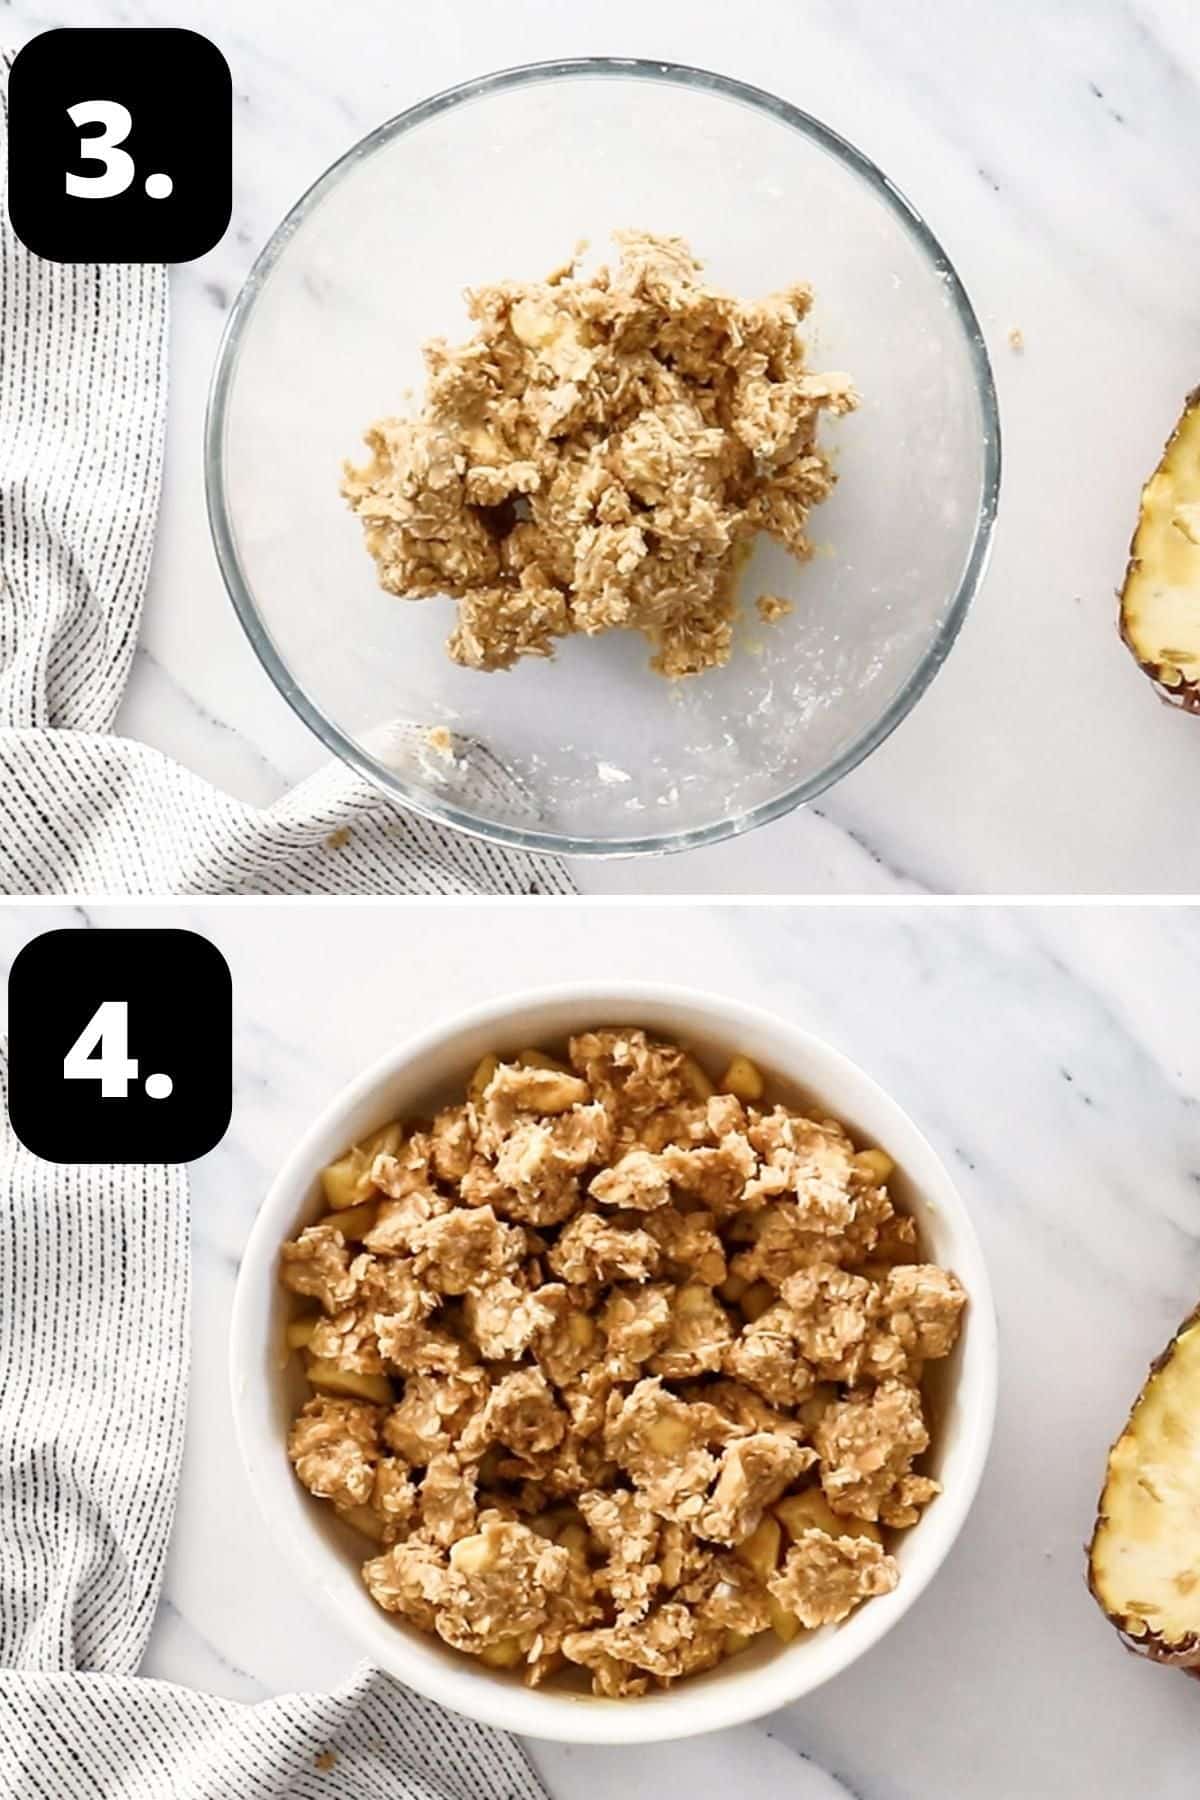 Steps 3-4 of preparing this recipe - making the crumble topping in a bowl, and the dish with the topping ready to bake.